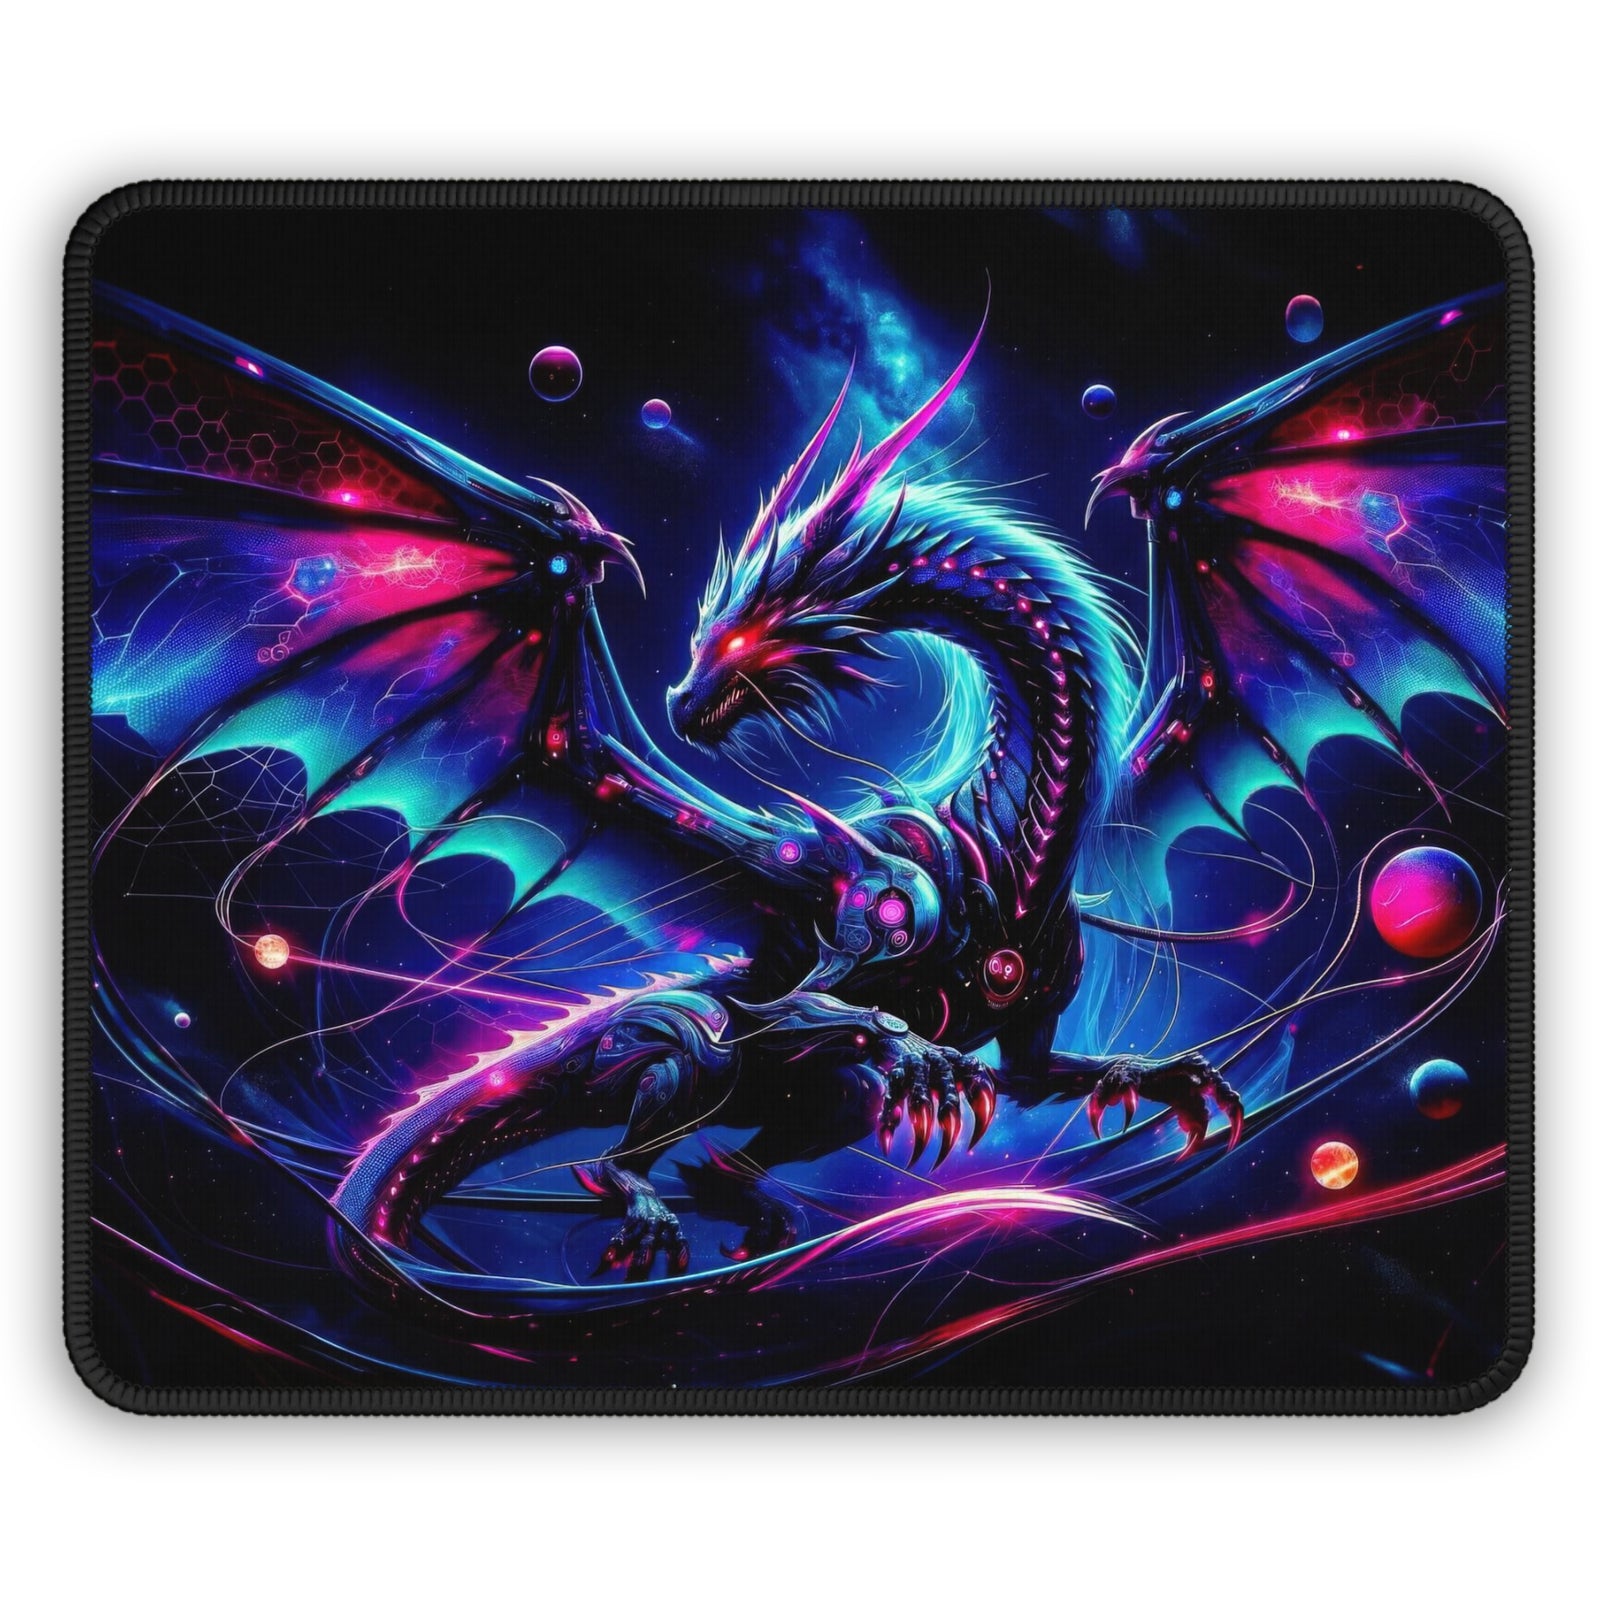 The Binary Beast Gaming Mouse Pad